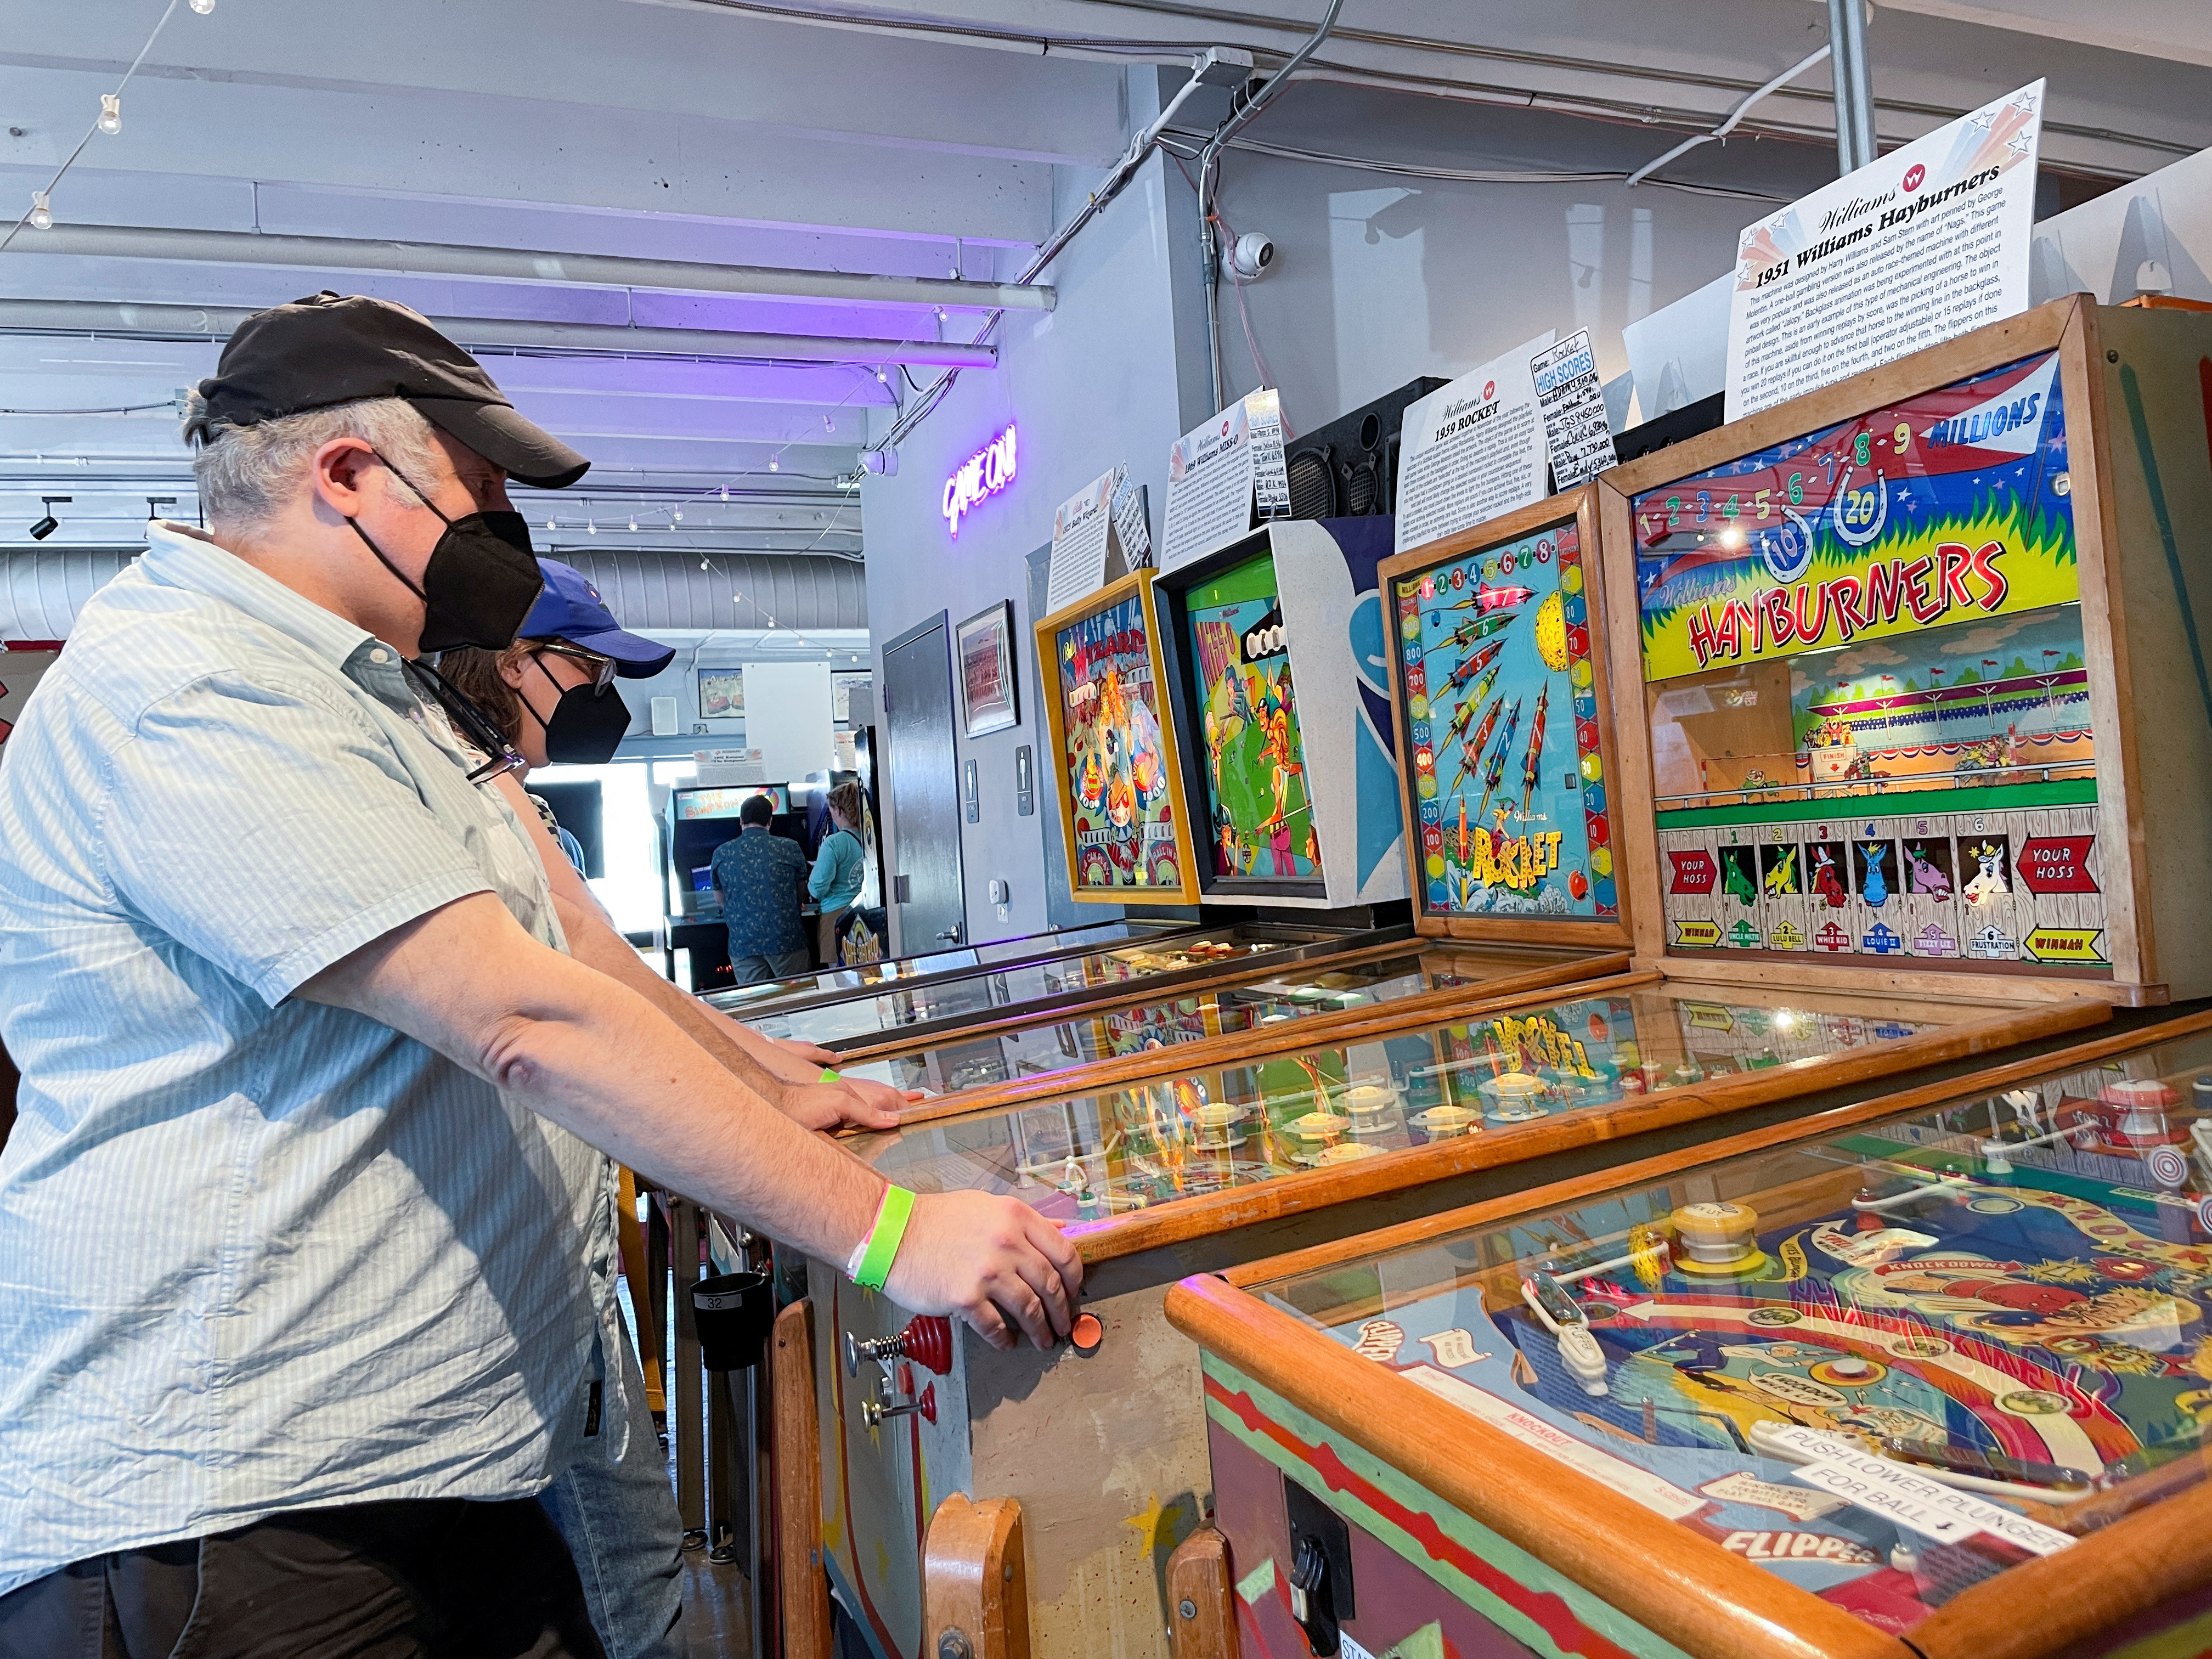 Silverball Retro Arcade is home to more than 150 pinball machines